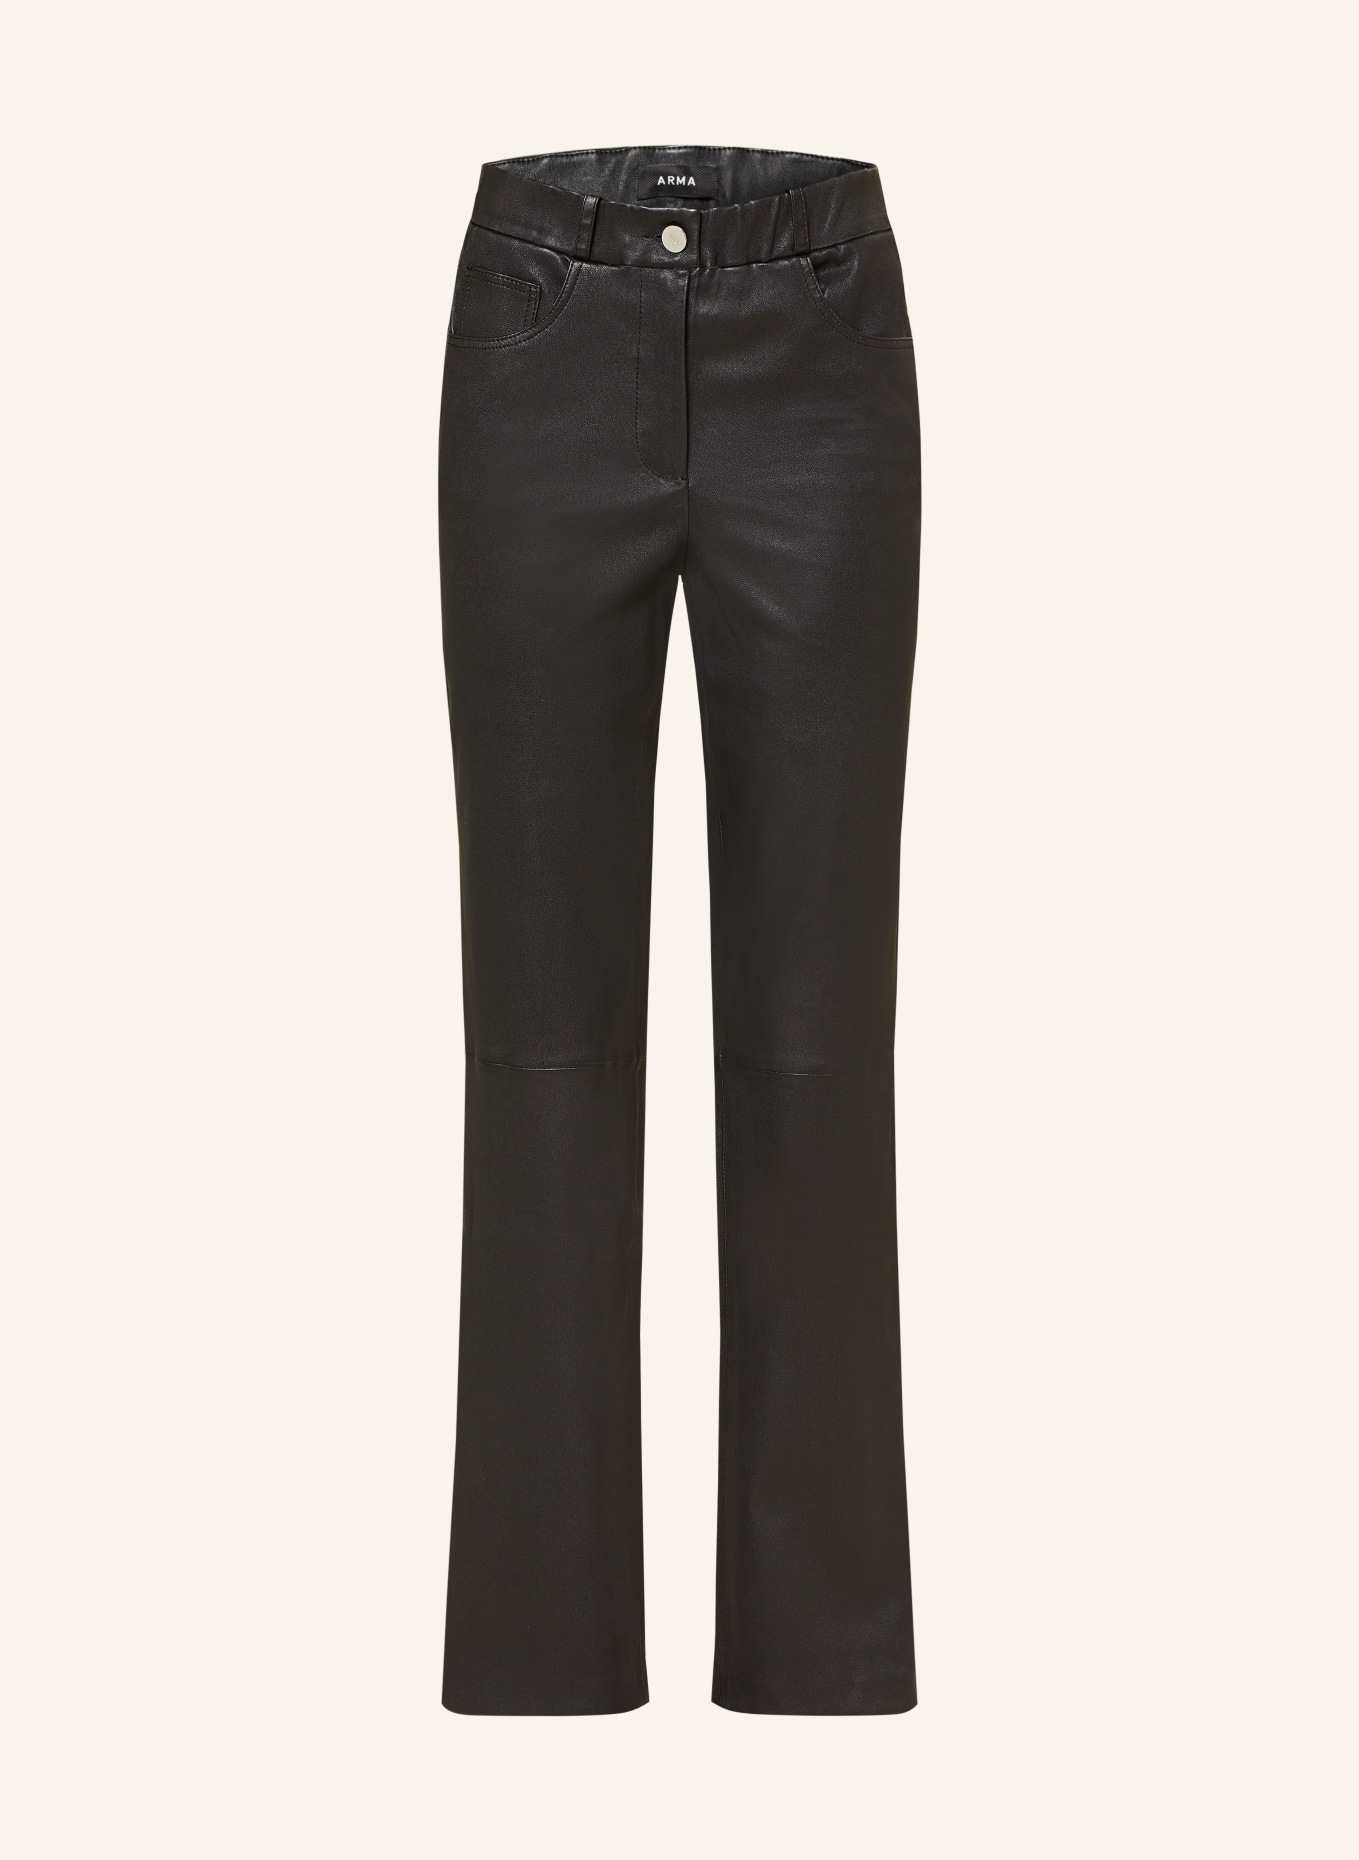 ARMA Leather trousers in black